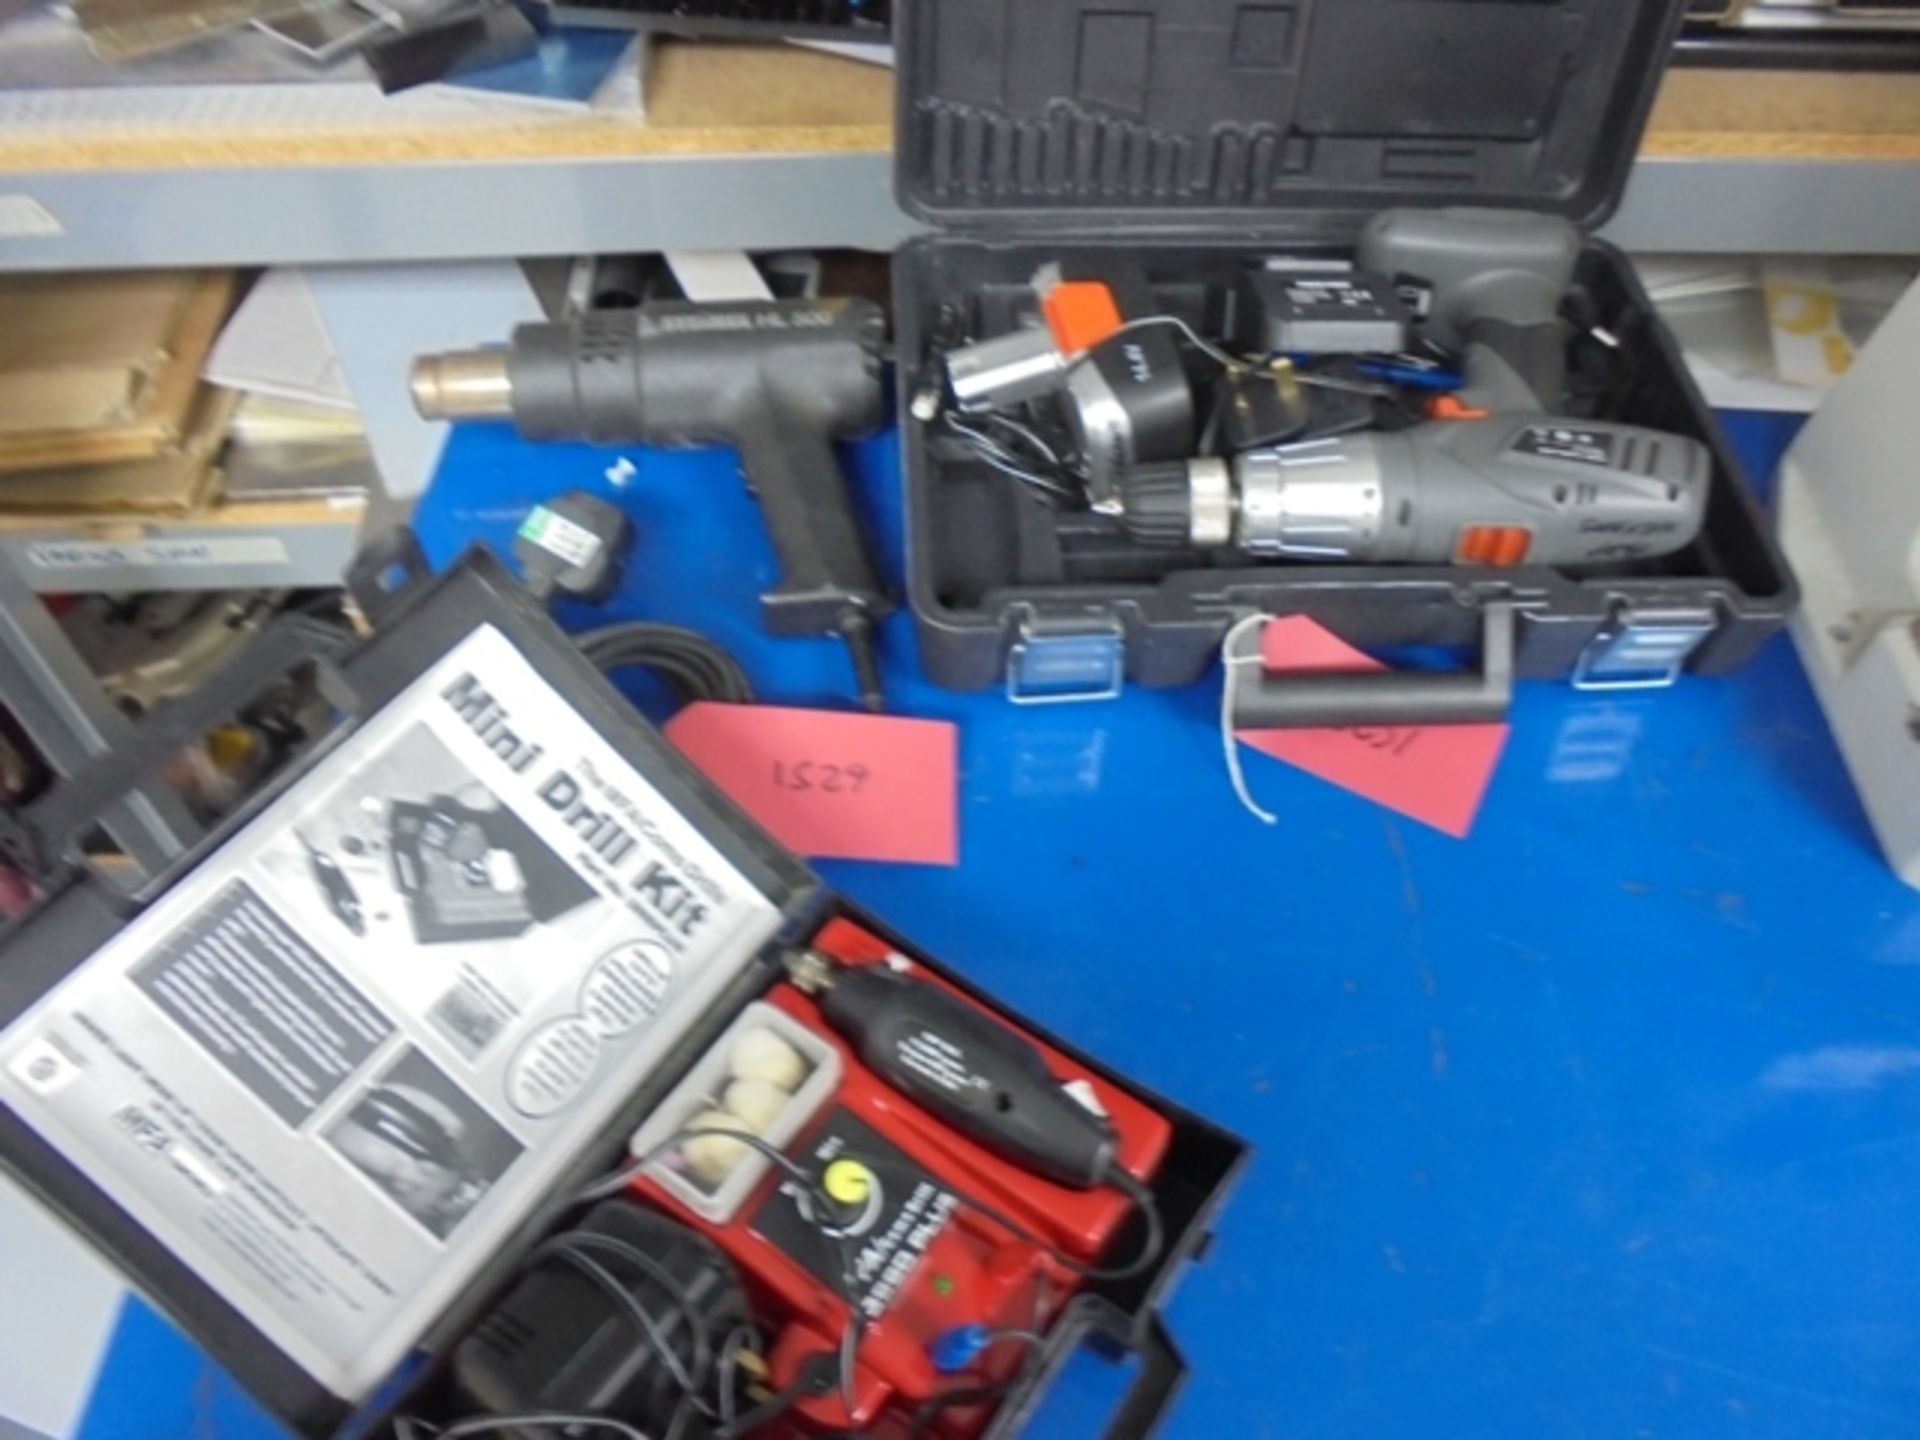 3 Items of Power Tools, Hot Air Gun, Battery Drill and Como 399D Drill.